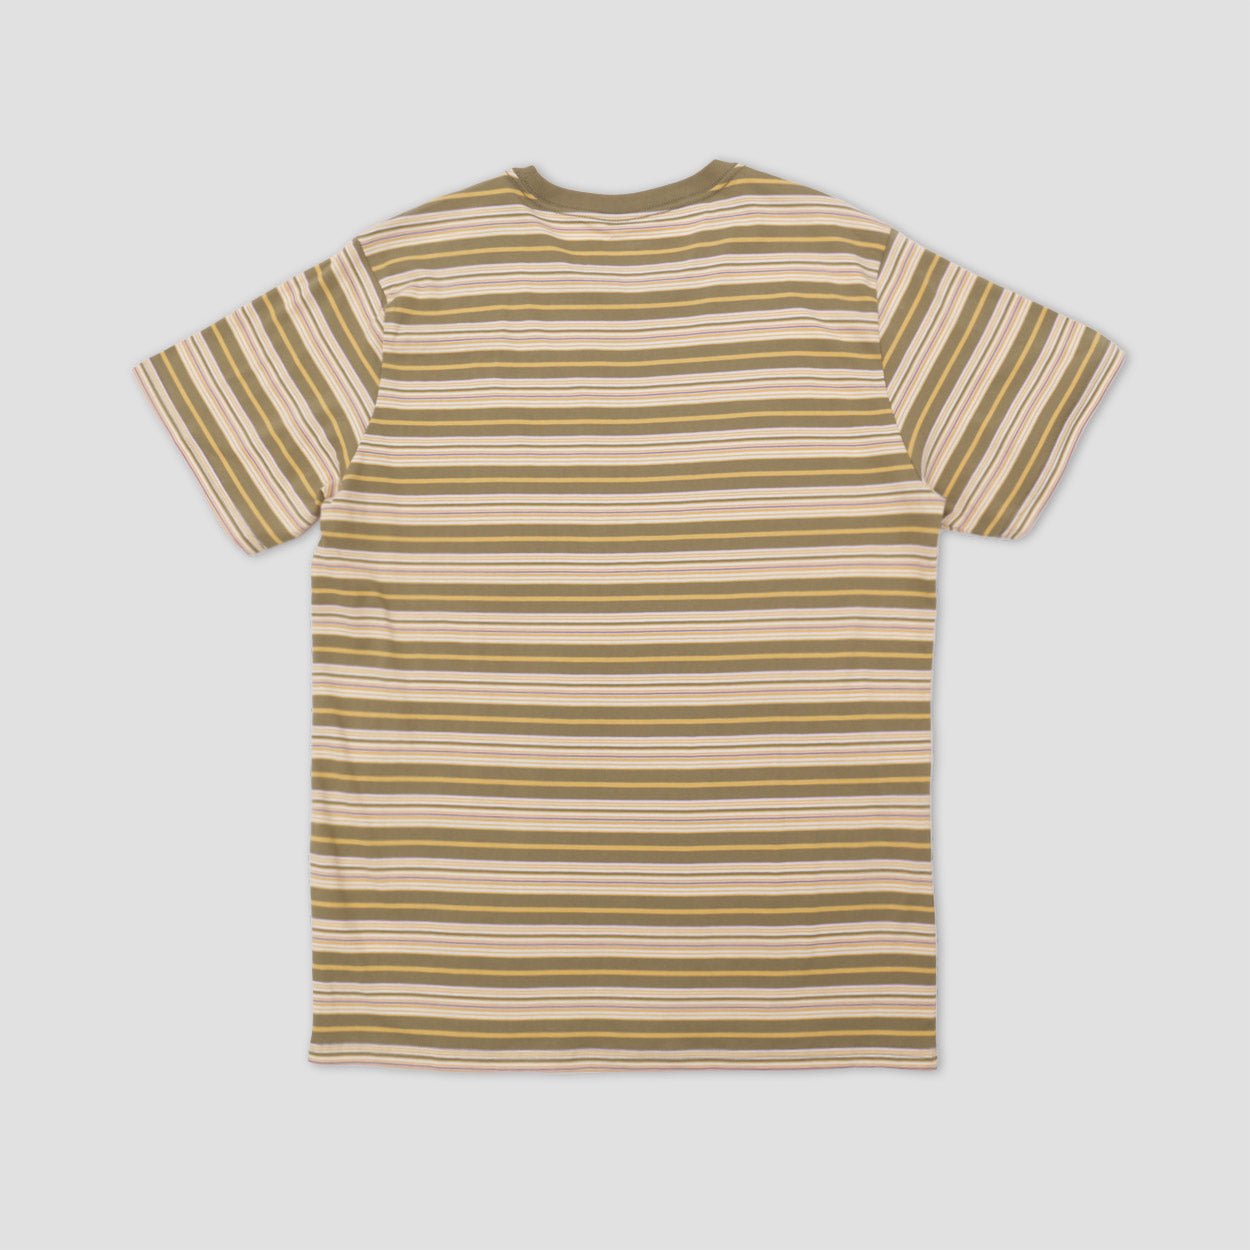 Converse Cons Striped T-Shirt Mossy Sloth